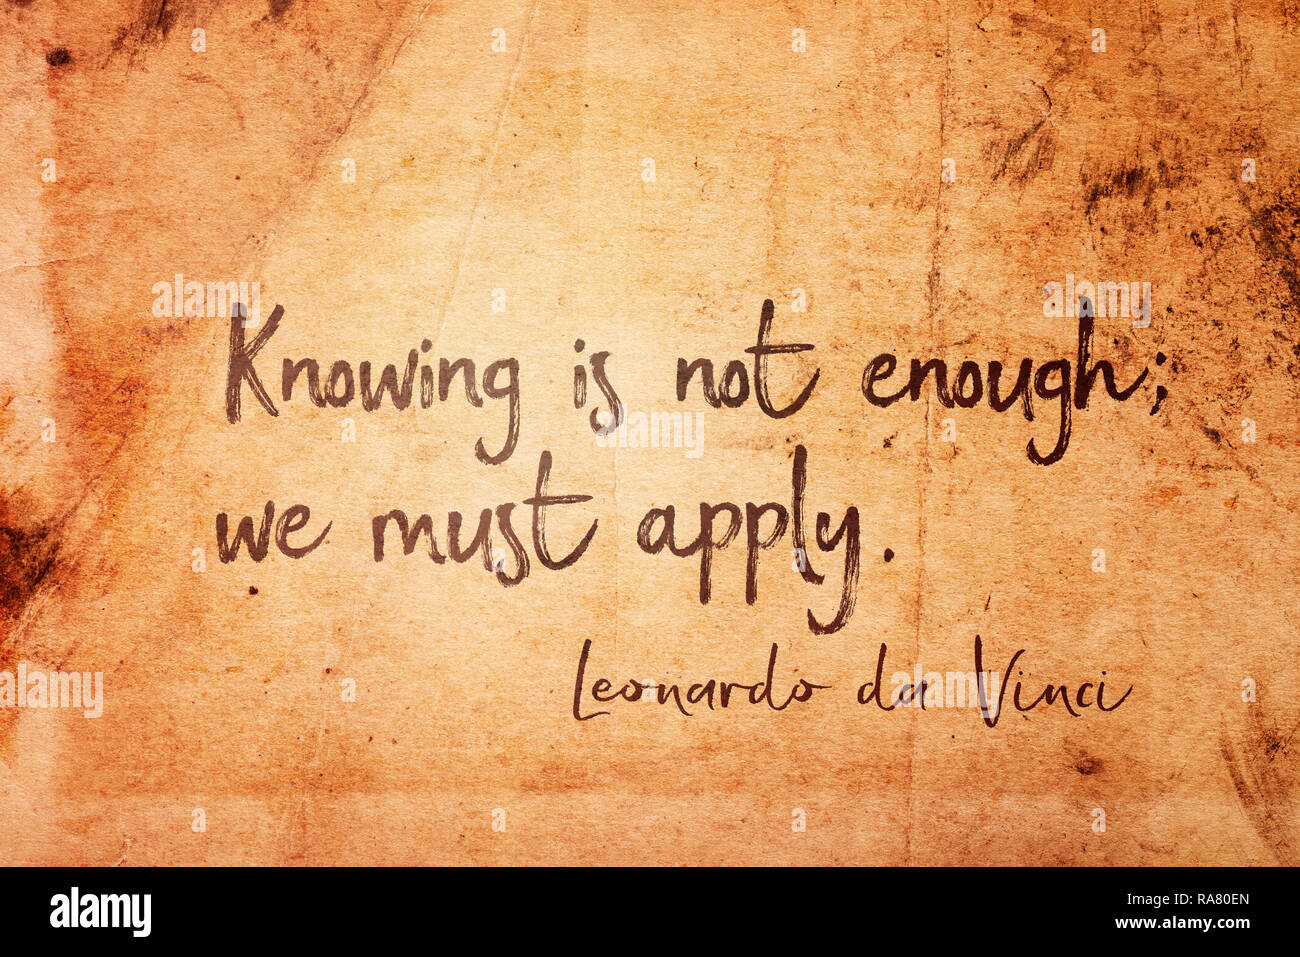 Knowing is not enough; we must apply - ancient Italian artist Leonardo da Vinci quote printed on vintage grunge paper Stock Photo